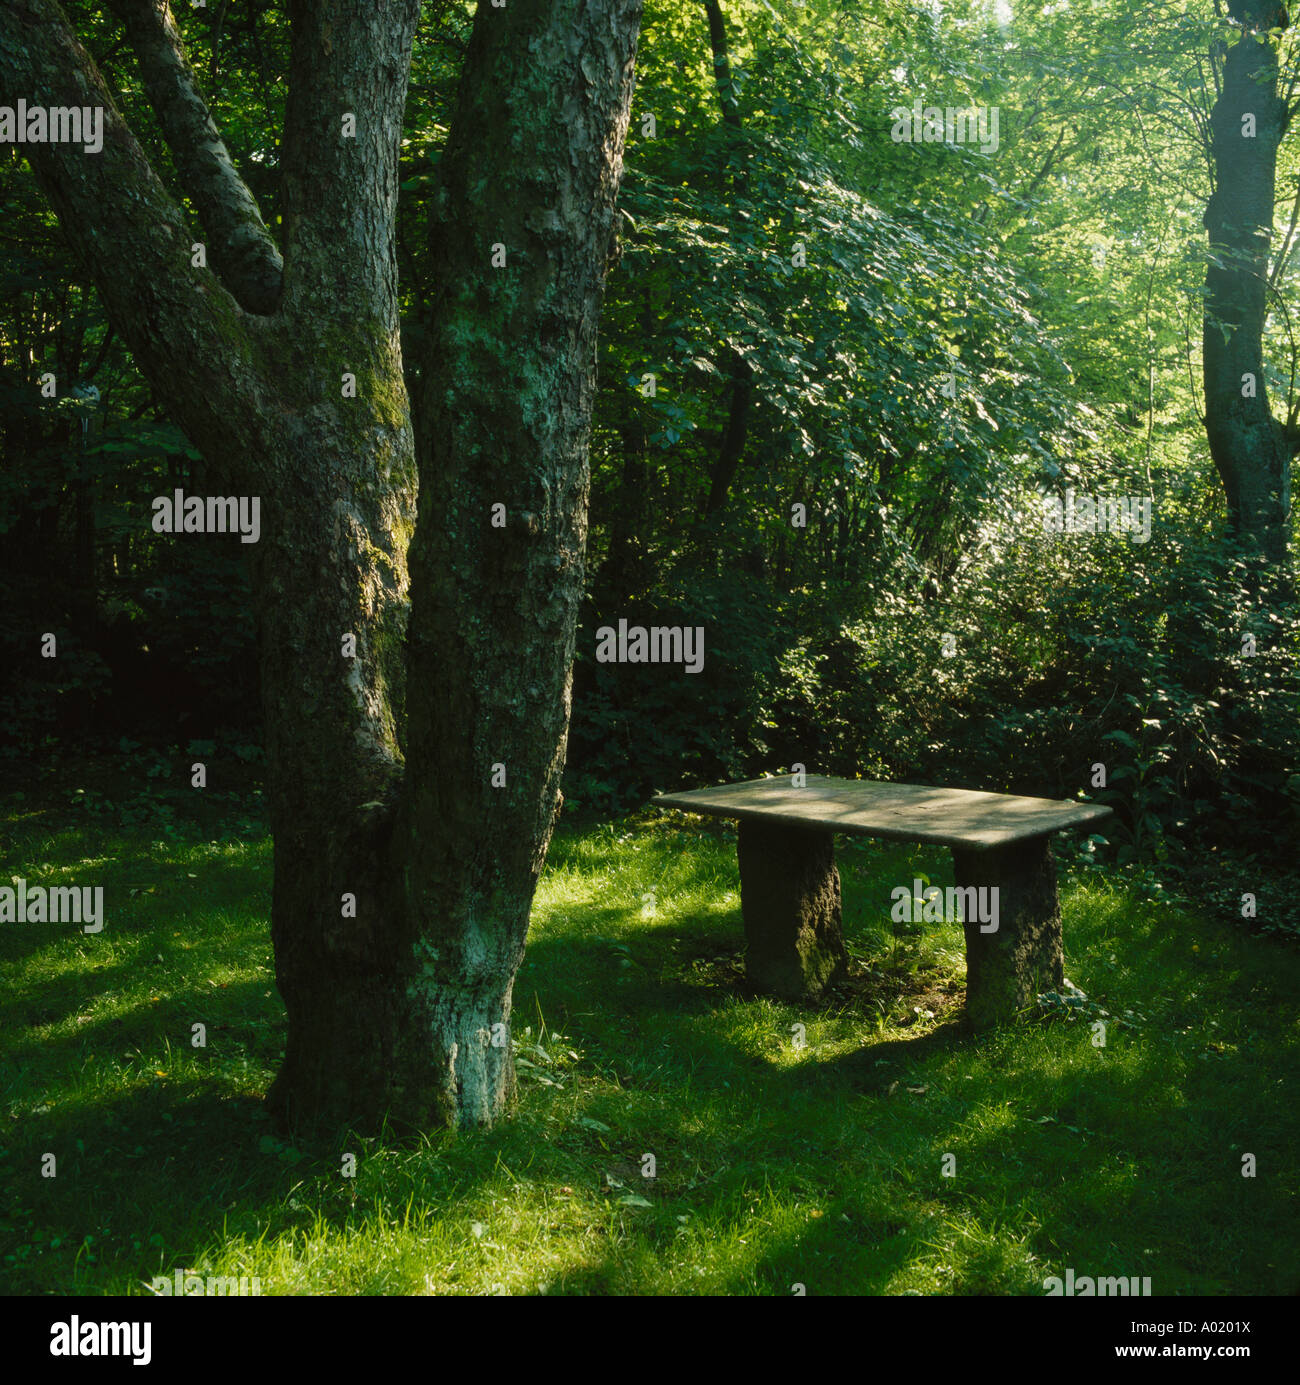 Rustic wooden bench on grass beneath large tree in shady corner of the  garden Stock Photo - Alamy